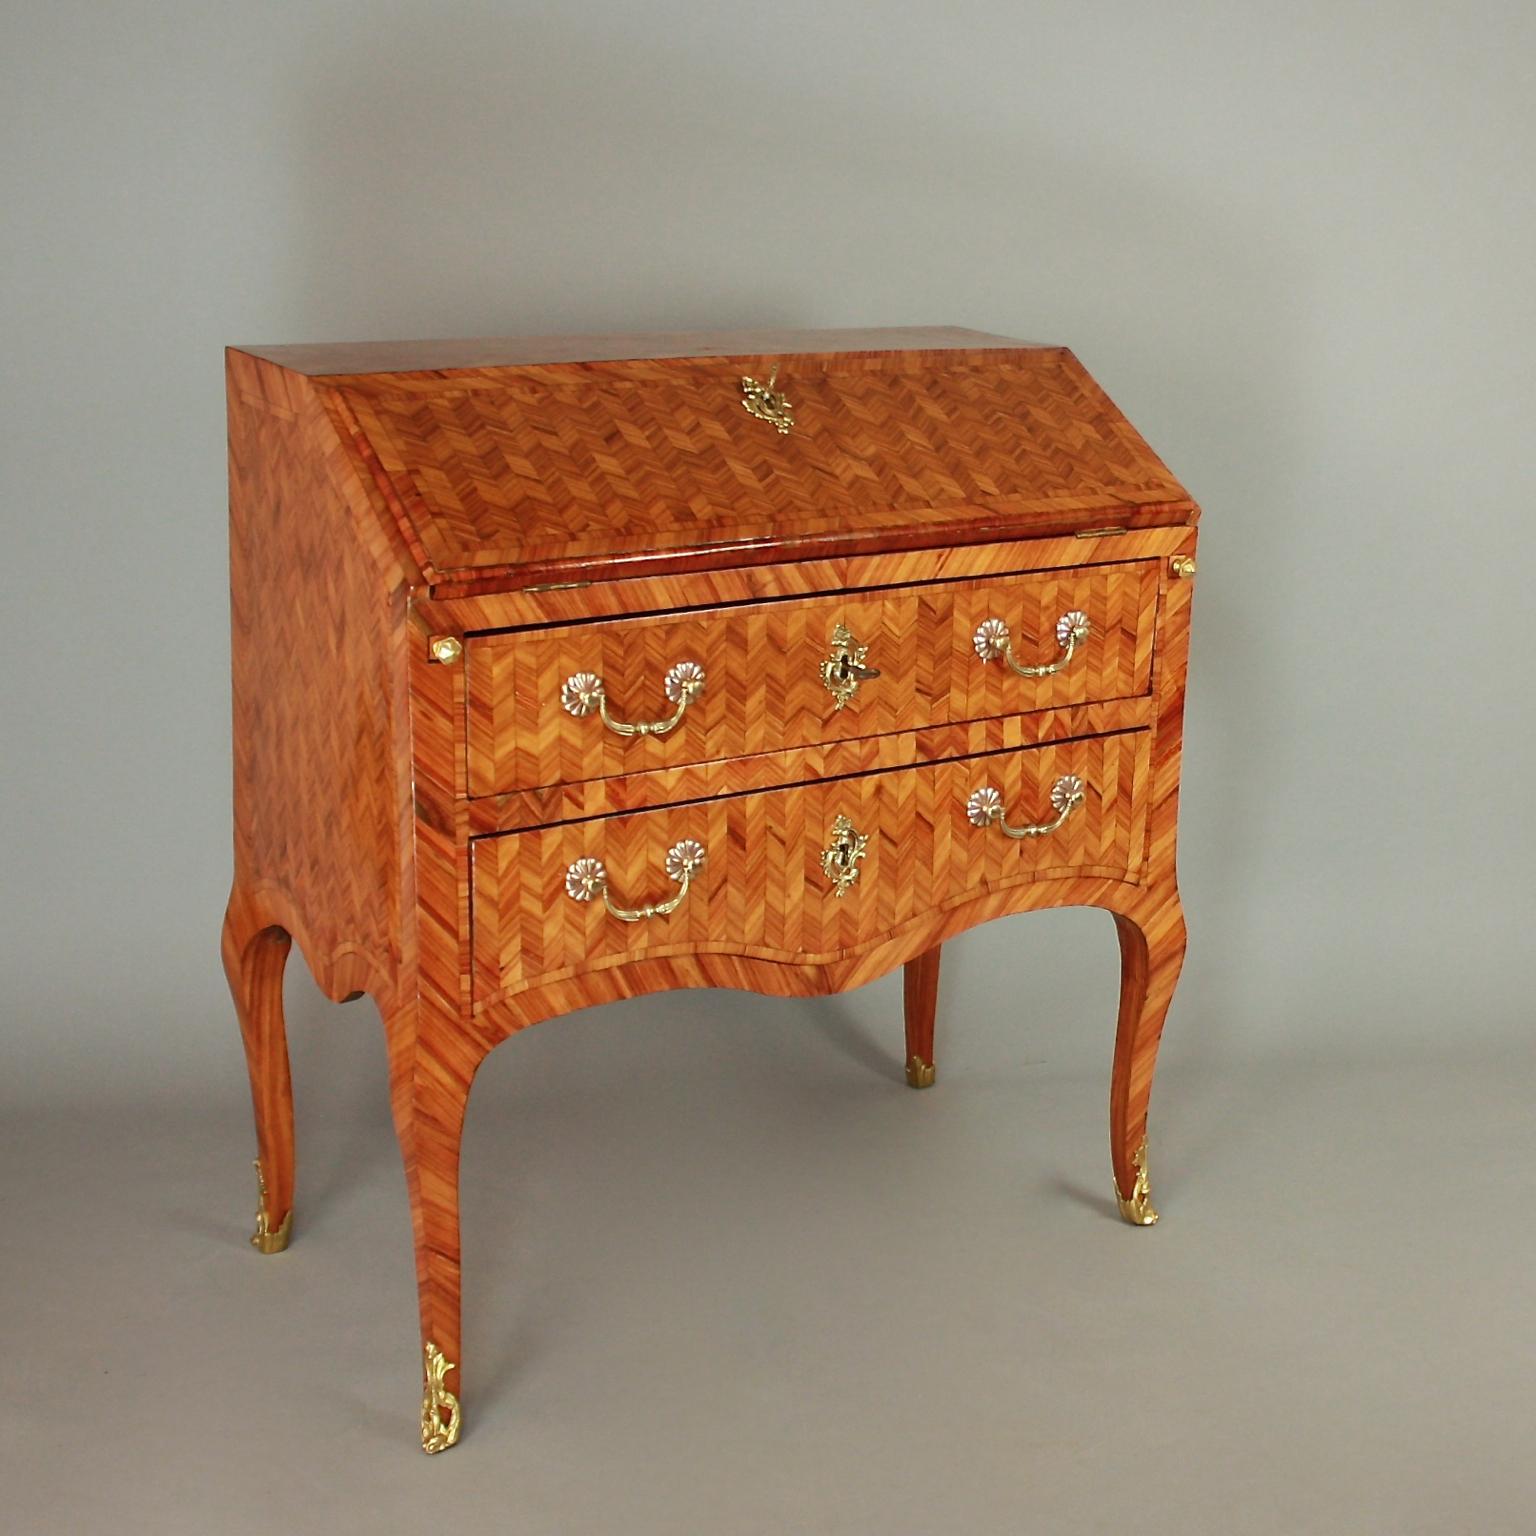 18th Century French Louis XV Herringbone Parquetry Commode à Secrétaire or Desk  2